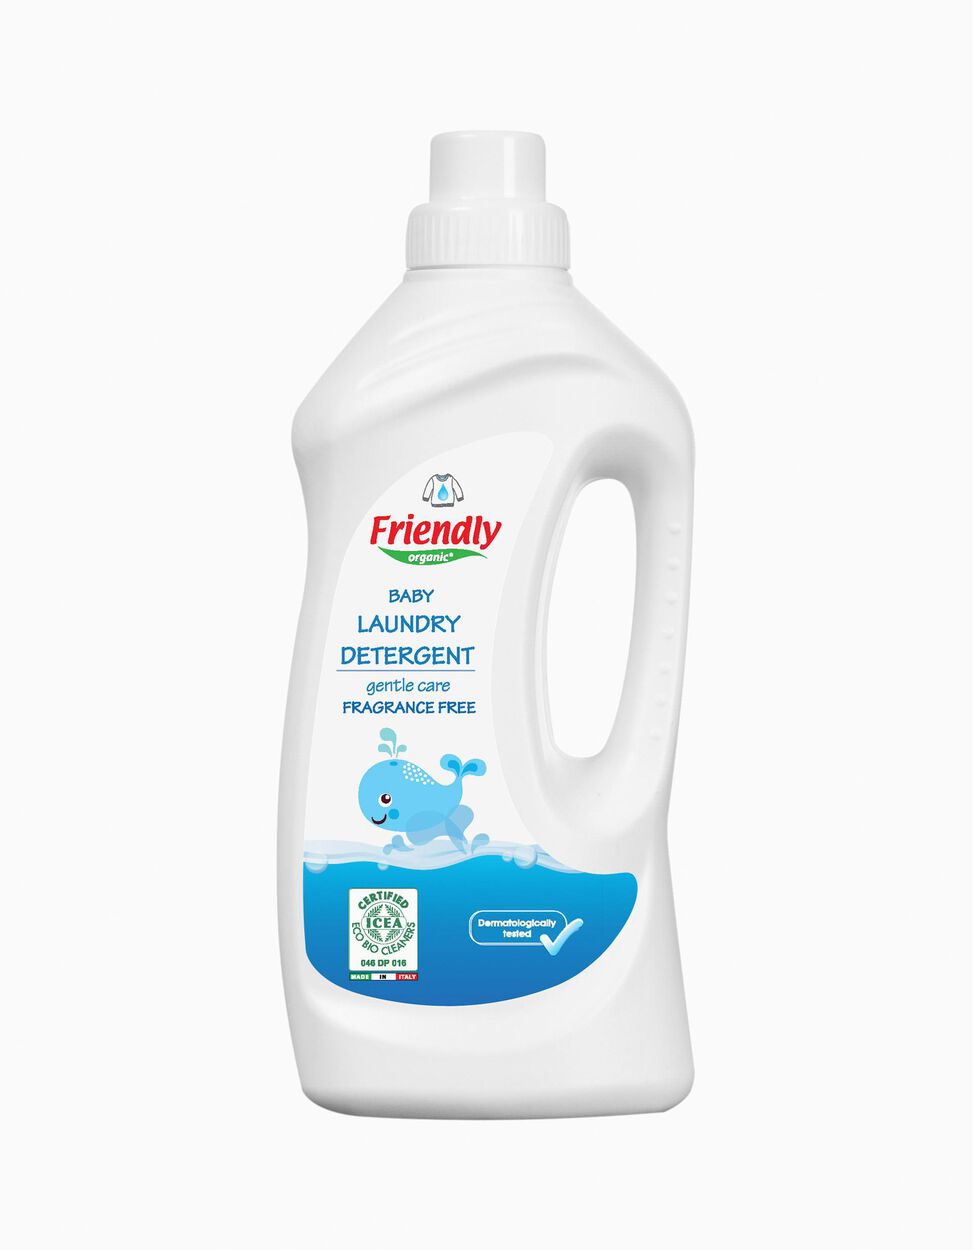 Laundry Detergent 1000ml by Friendly